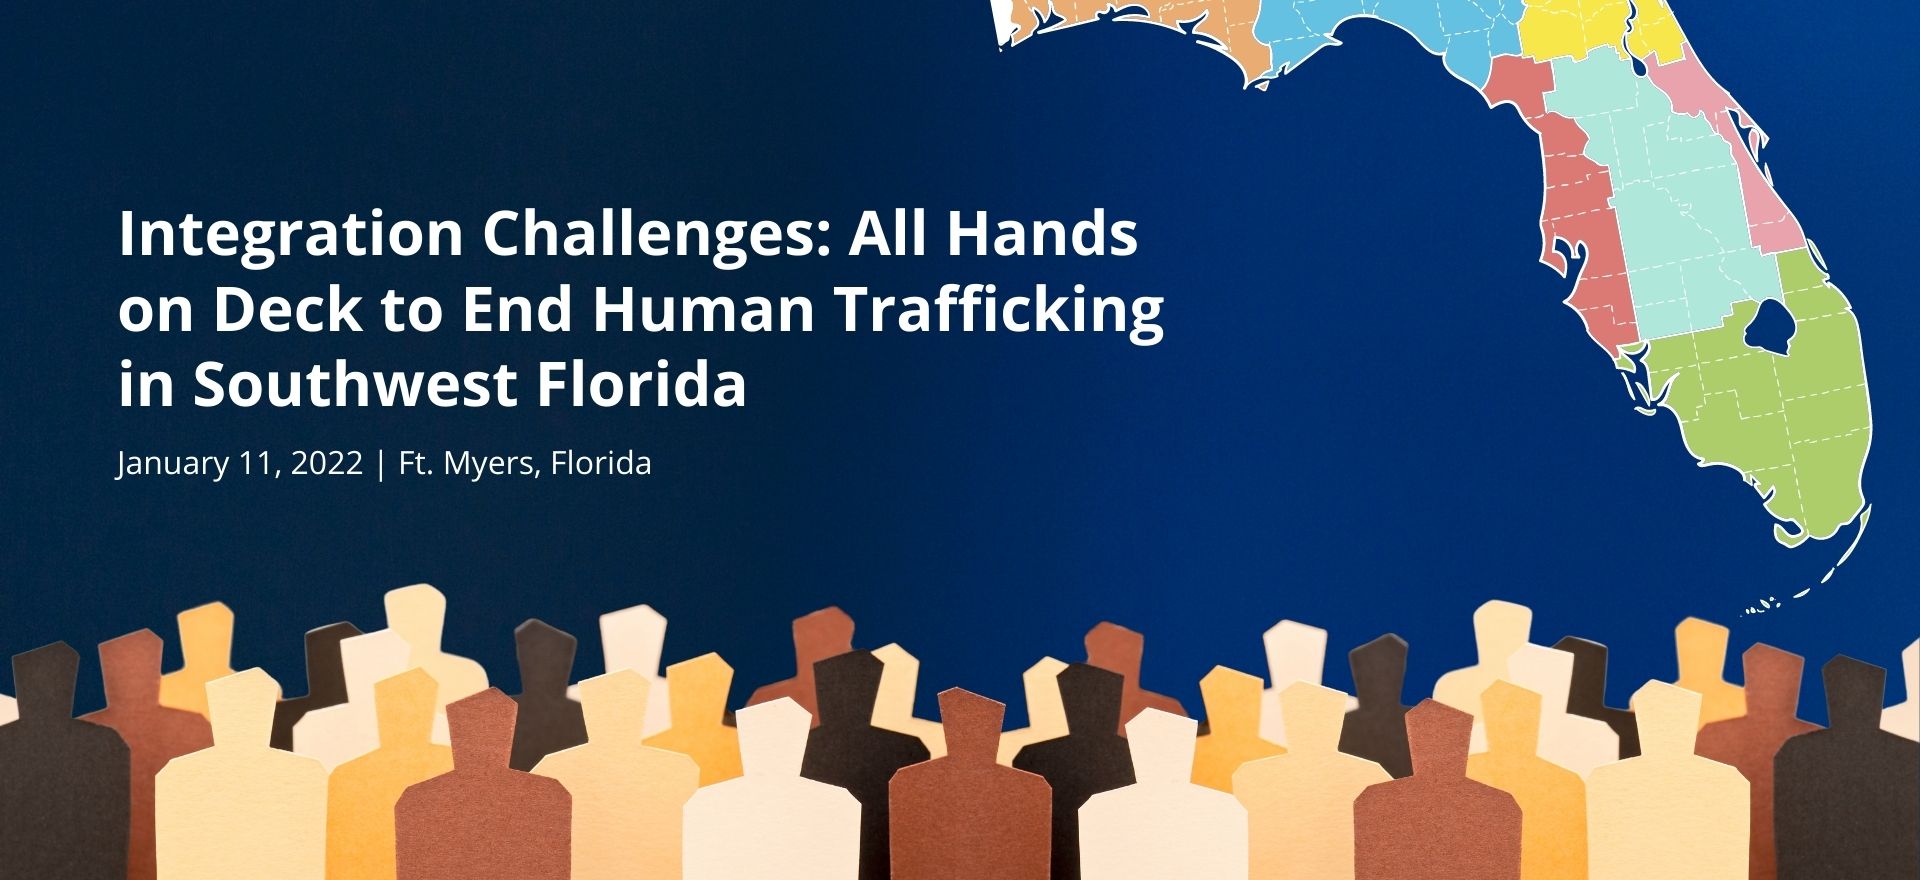 Integration Challenges All Hands on Deck to End Human Trafficking in Southwest Florida